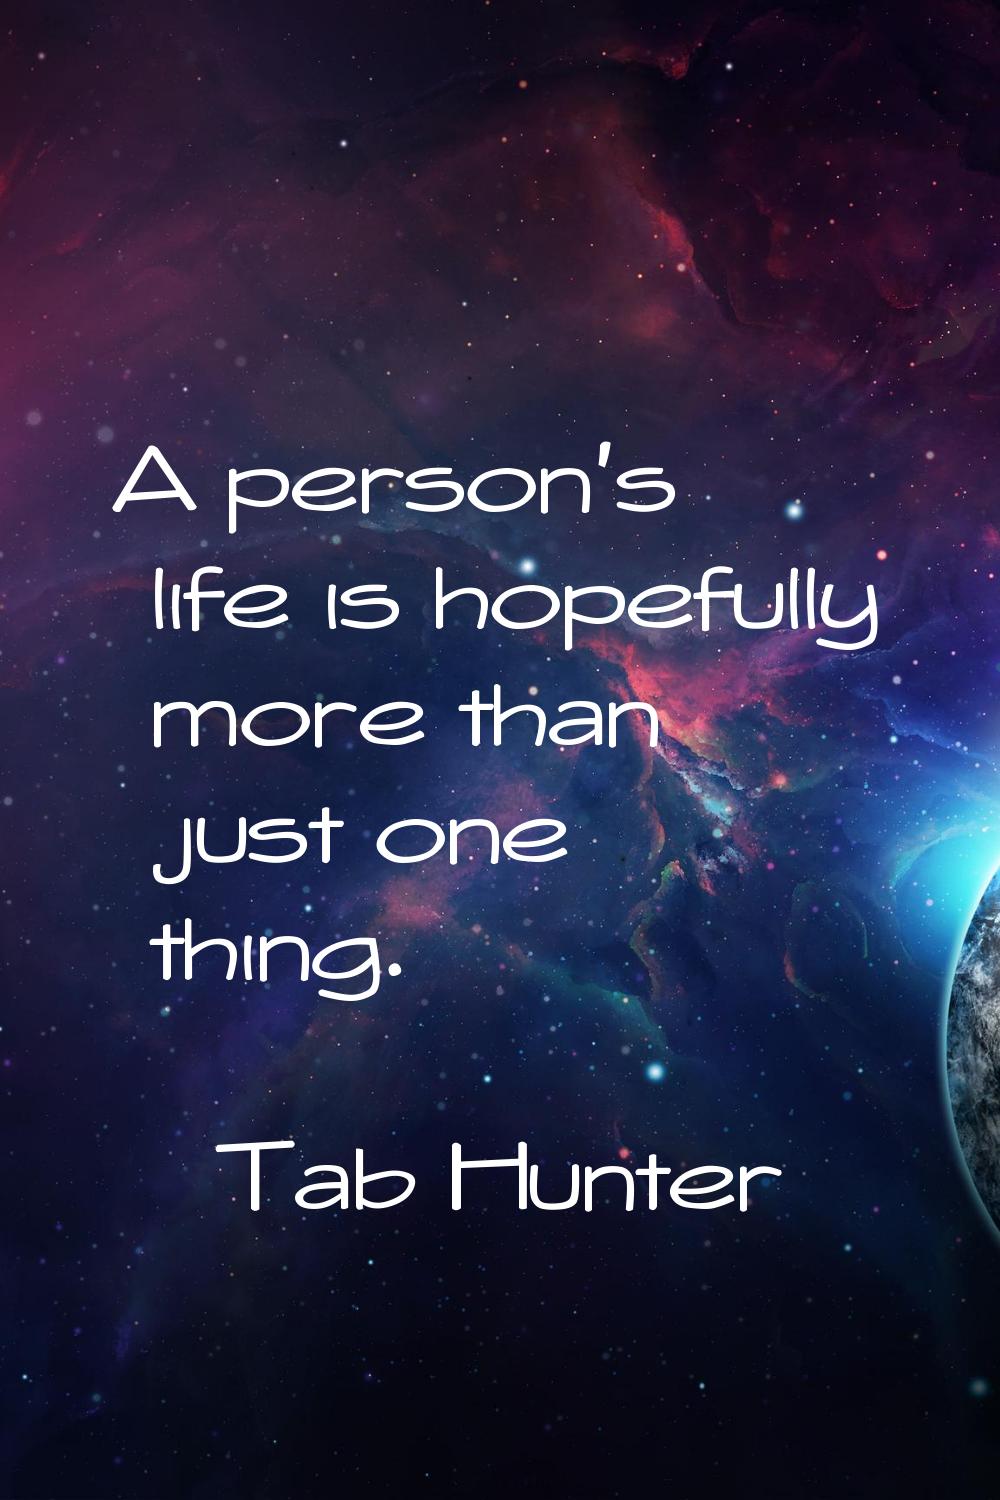 A person's life is hopefully more than just one thing.